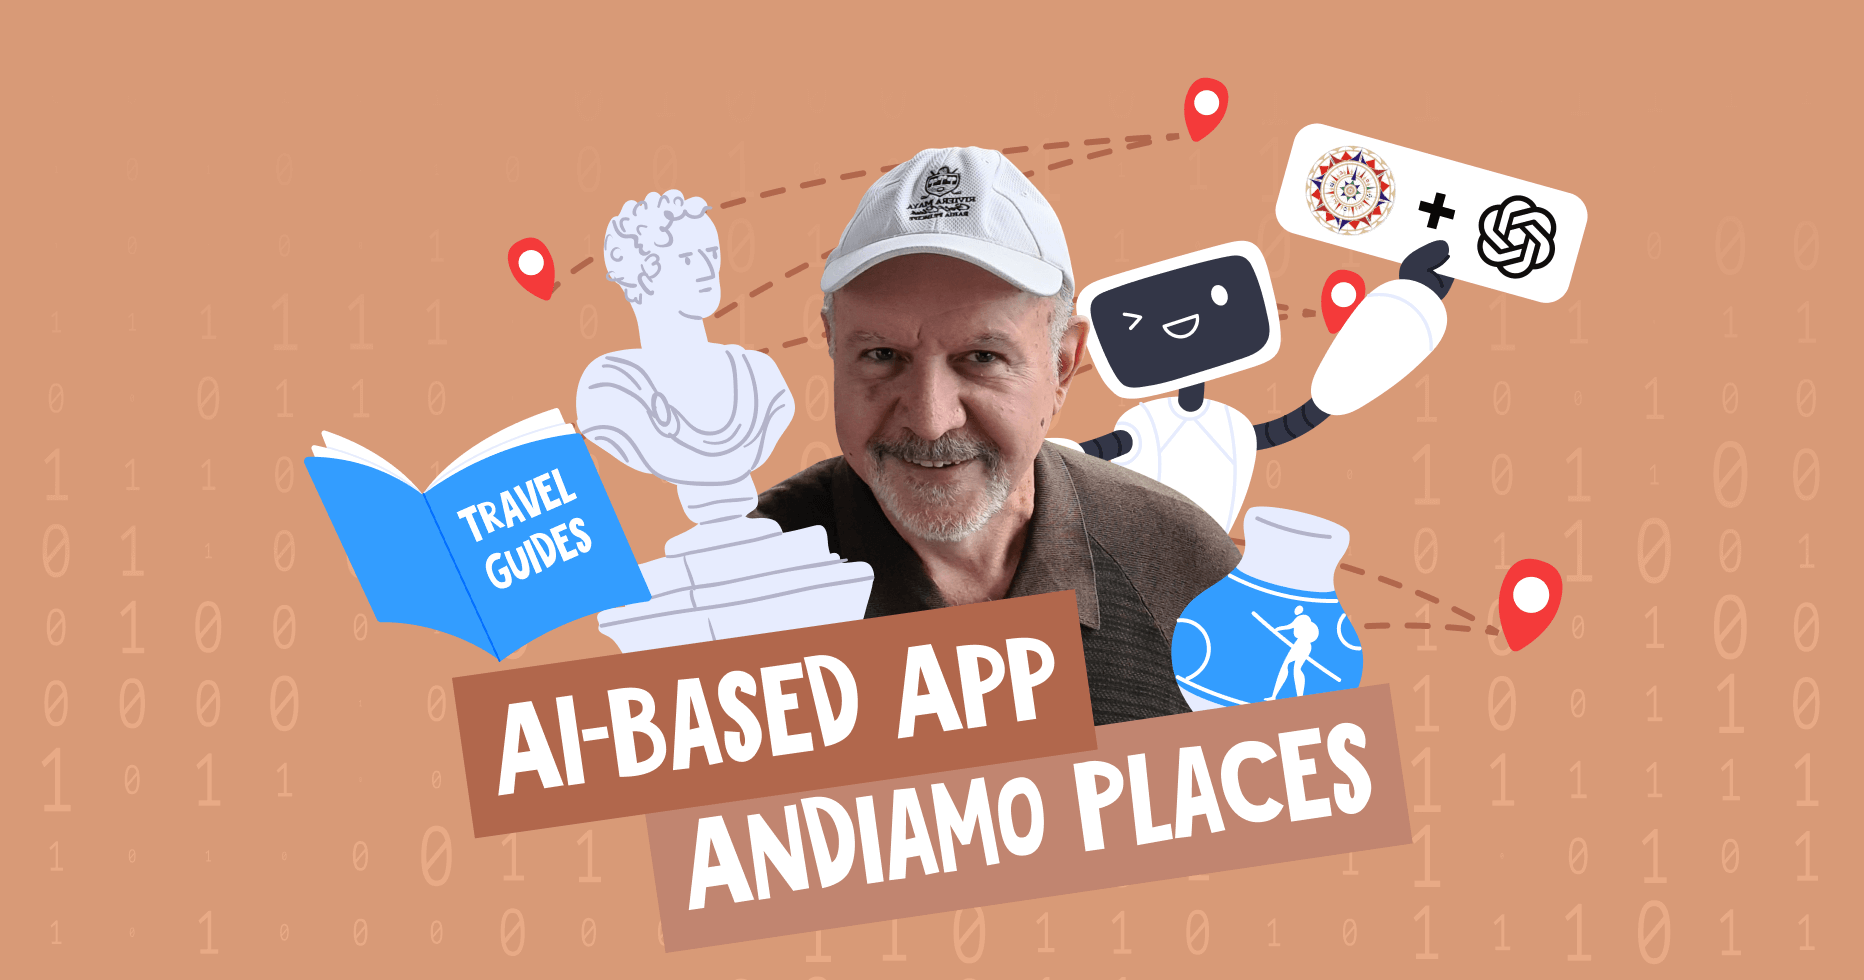 Andiamo Places: AI-Based App for Creating Travel Guides